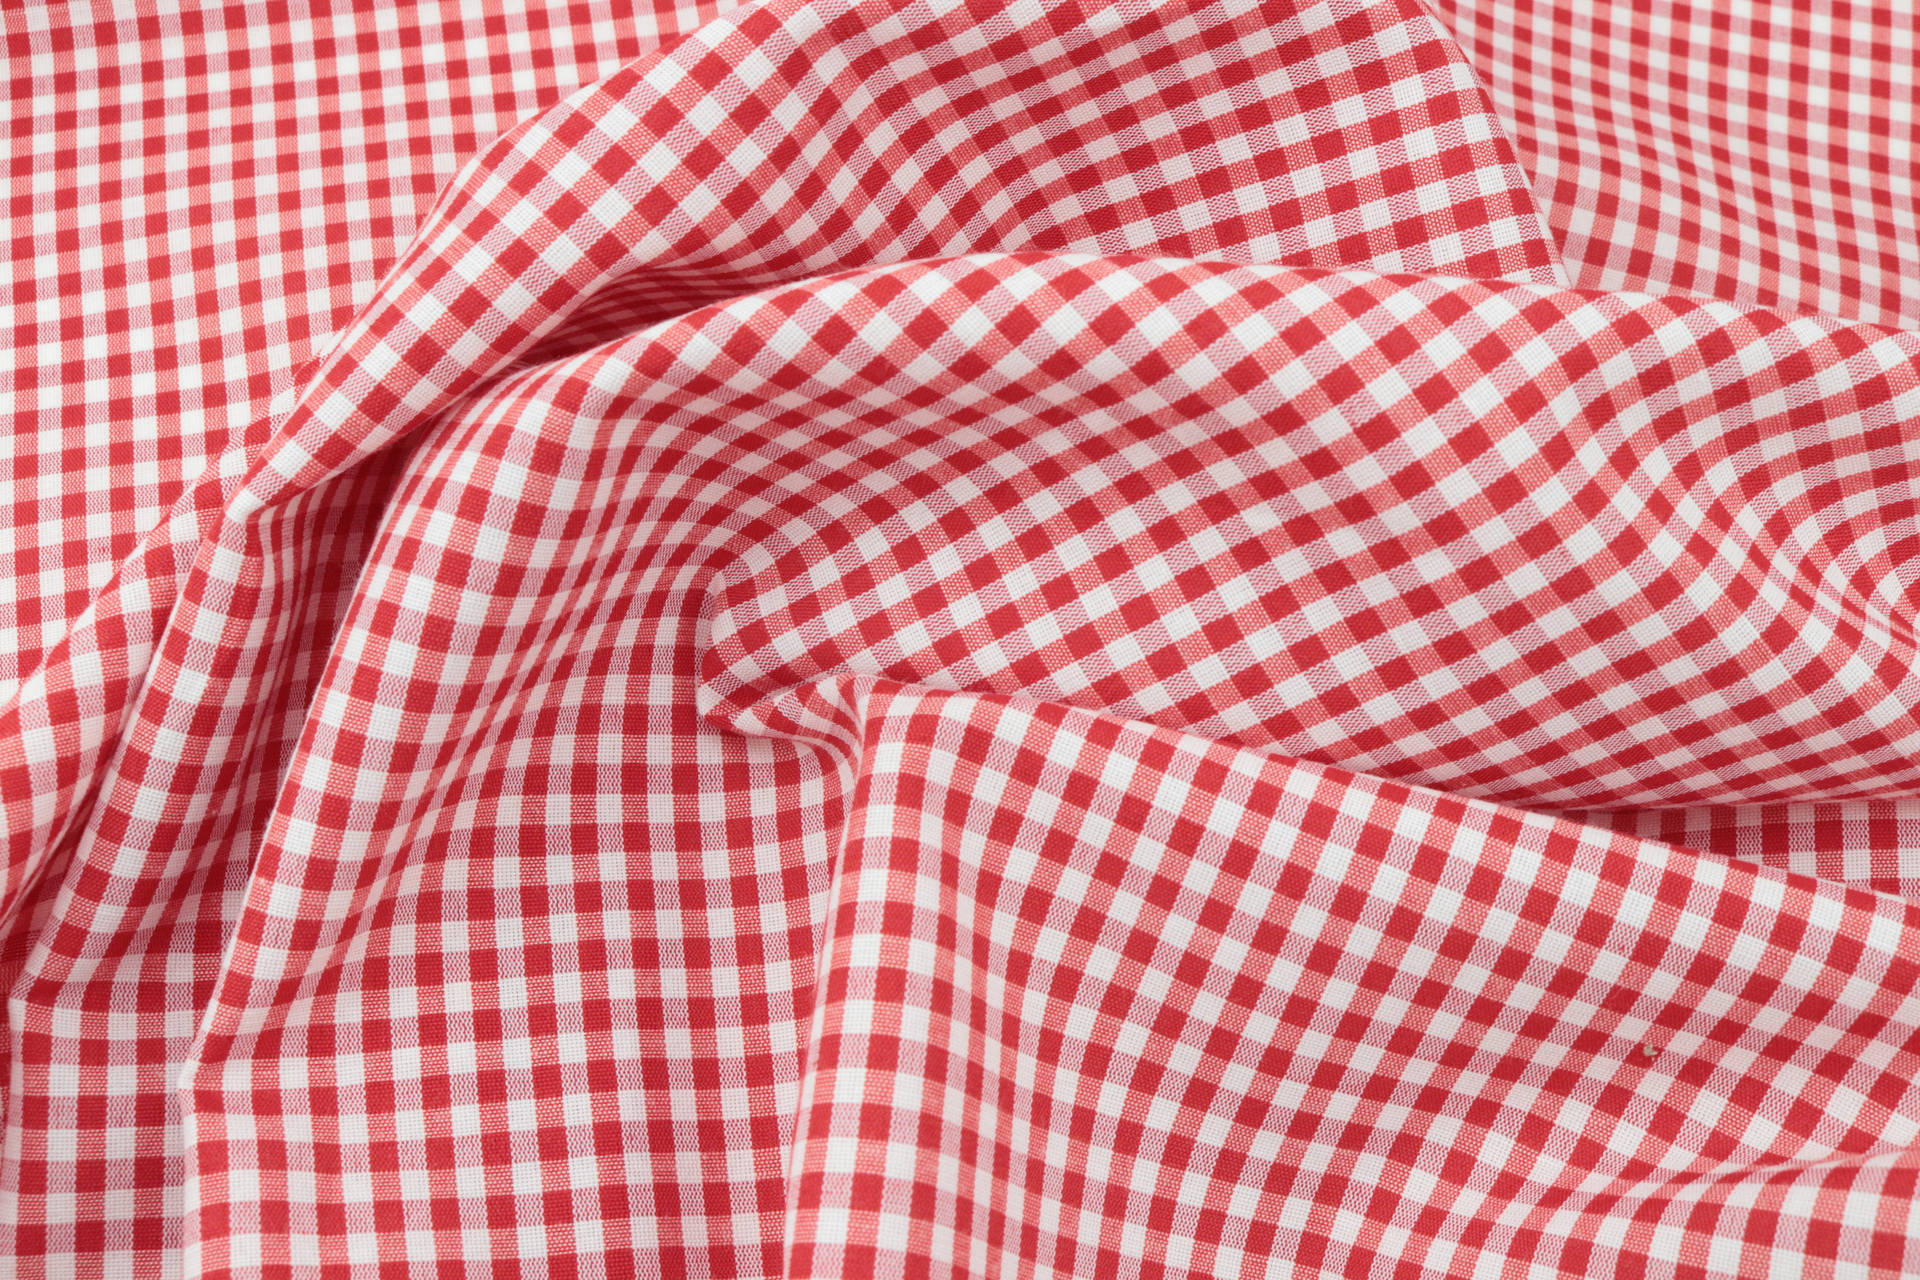 Red And White Checkered Tablecloth Wallpaper